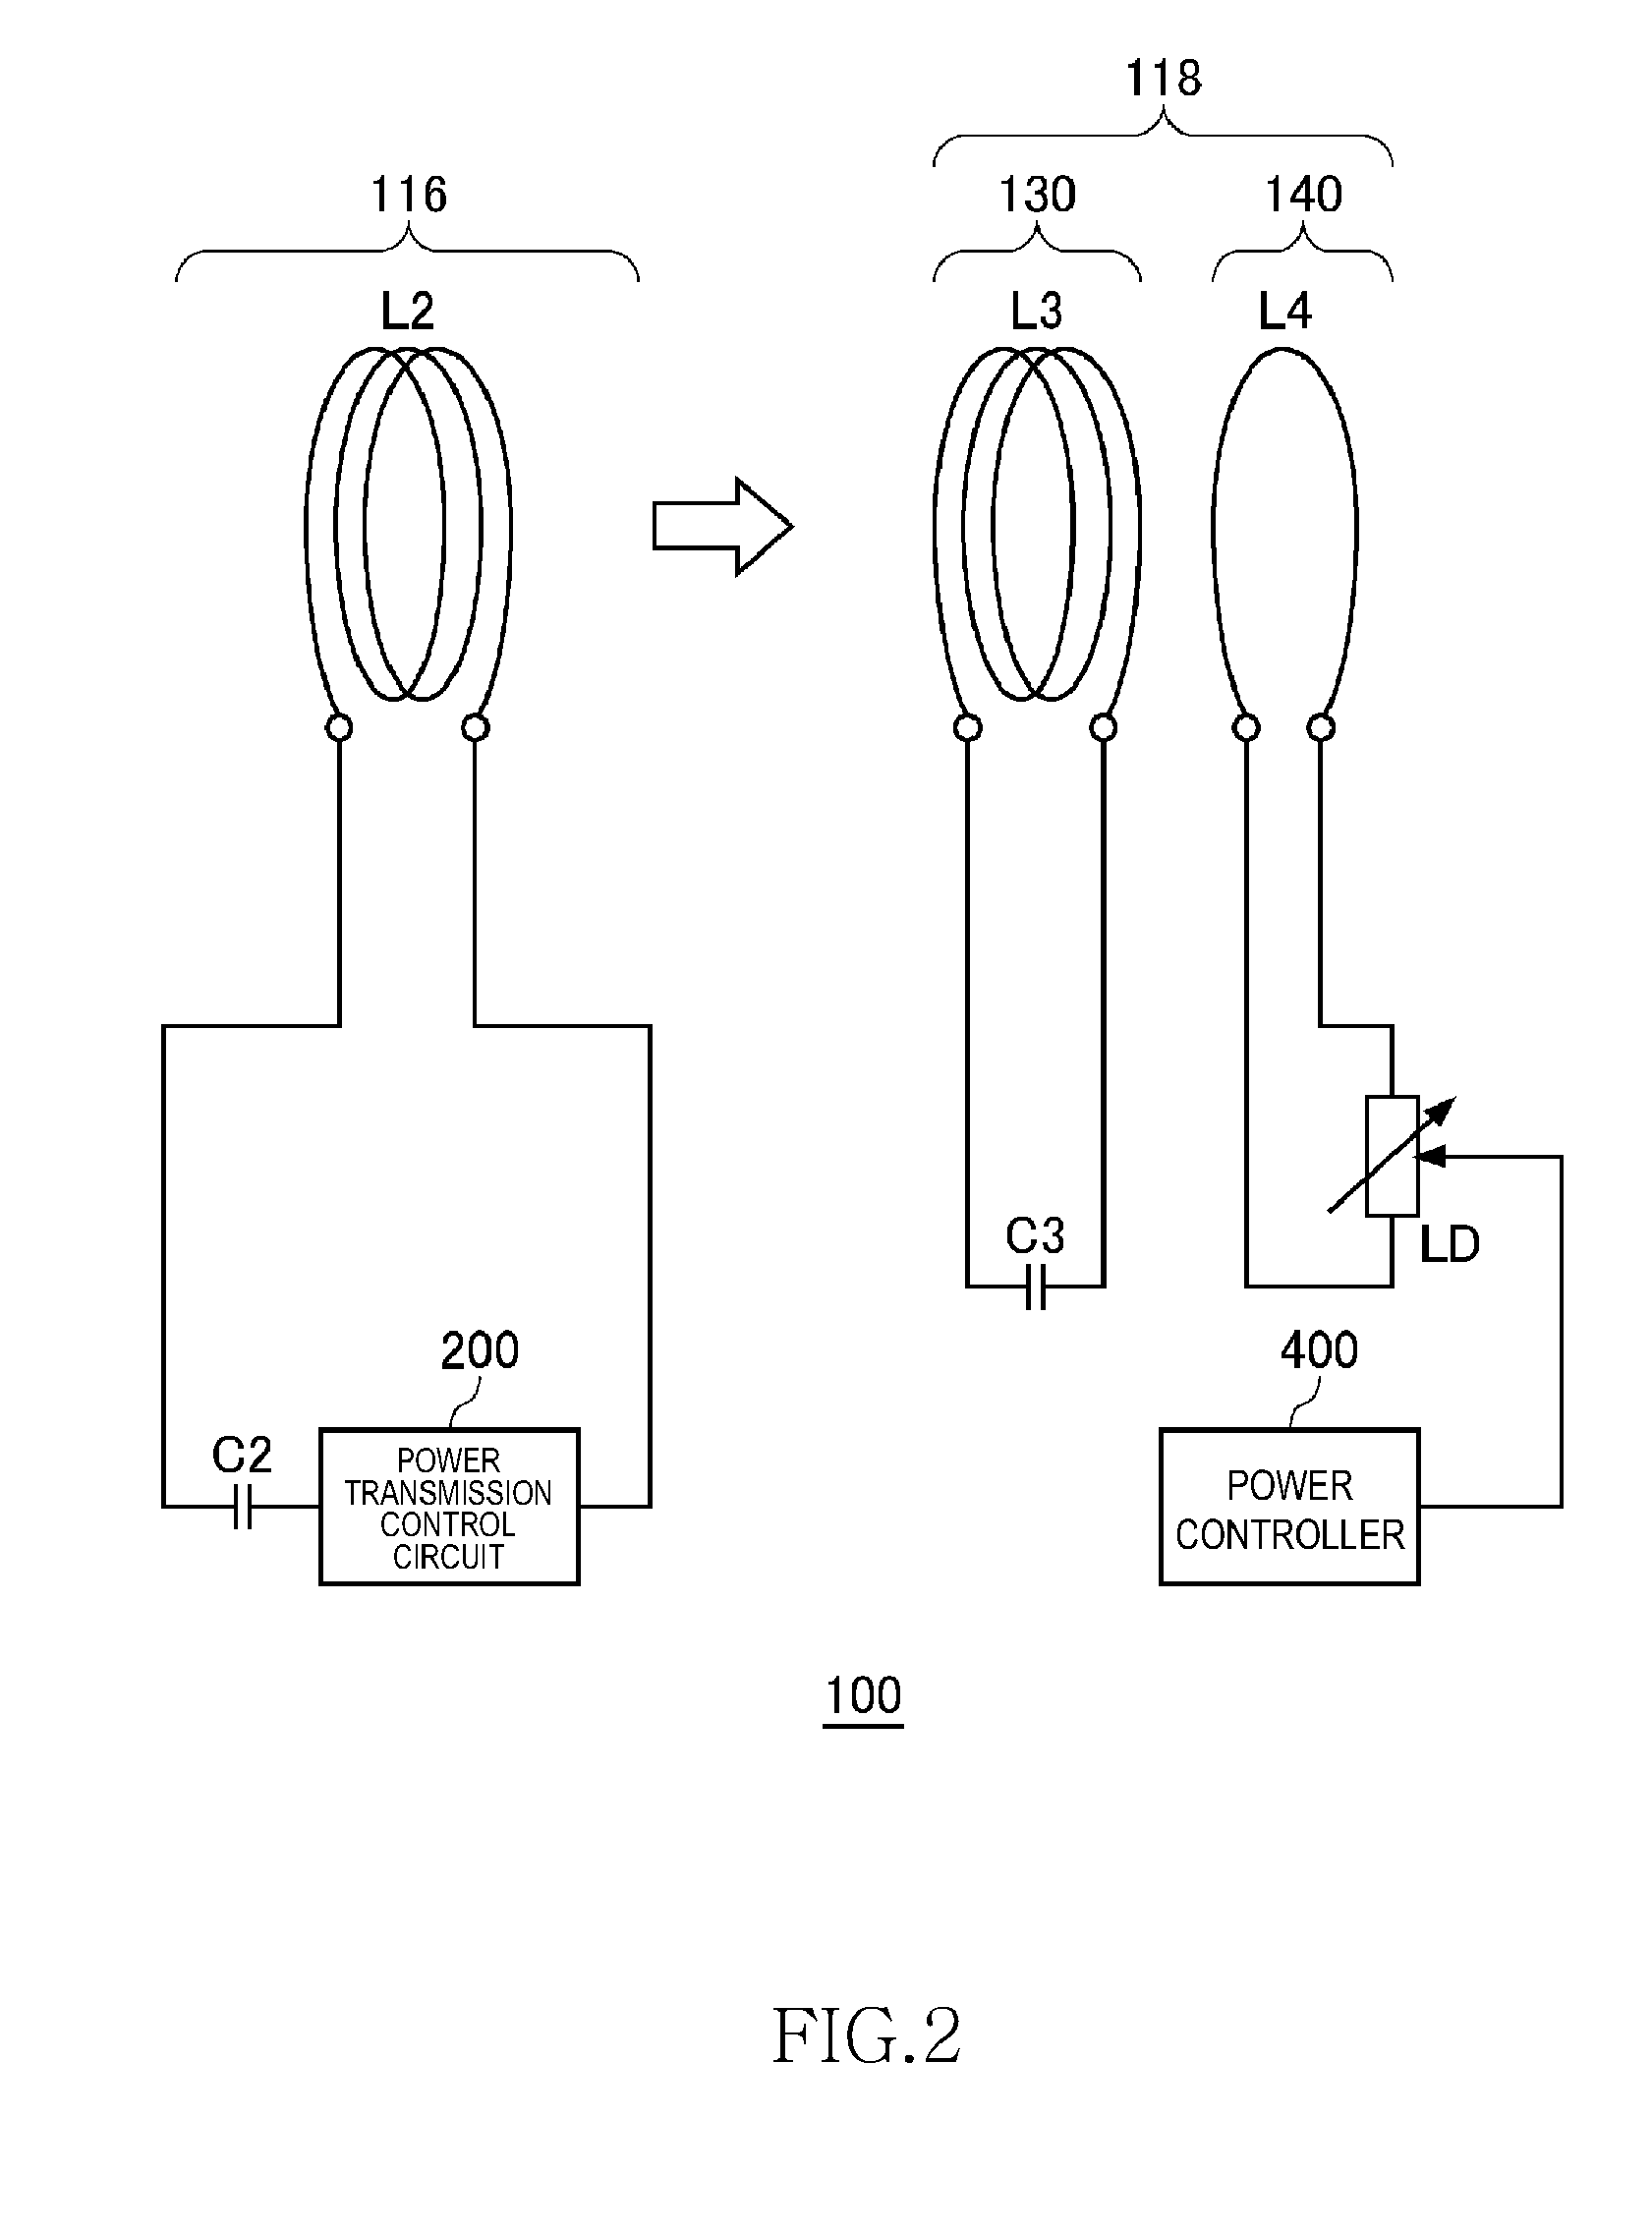 Wireless power receiver, wireless power transmission system, and power controller